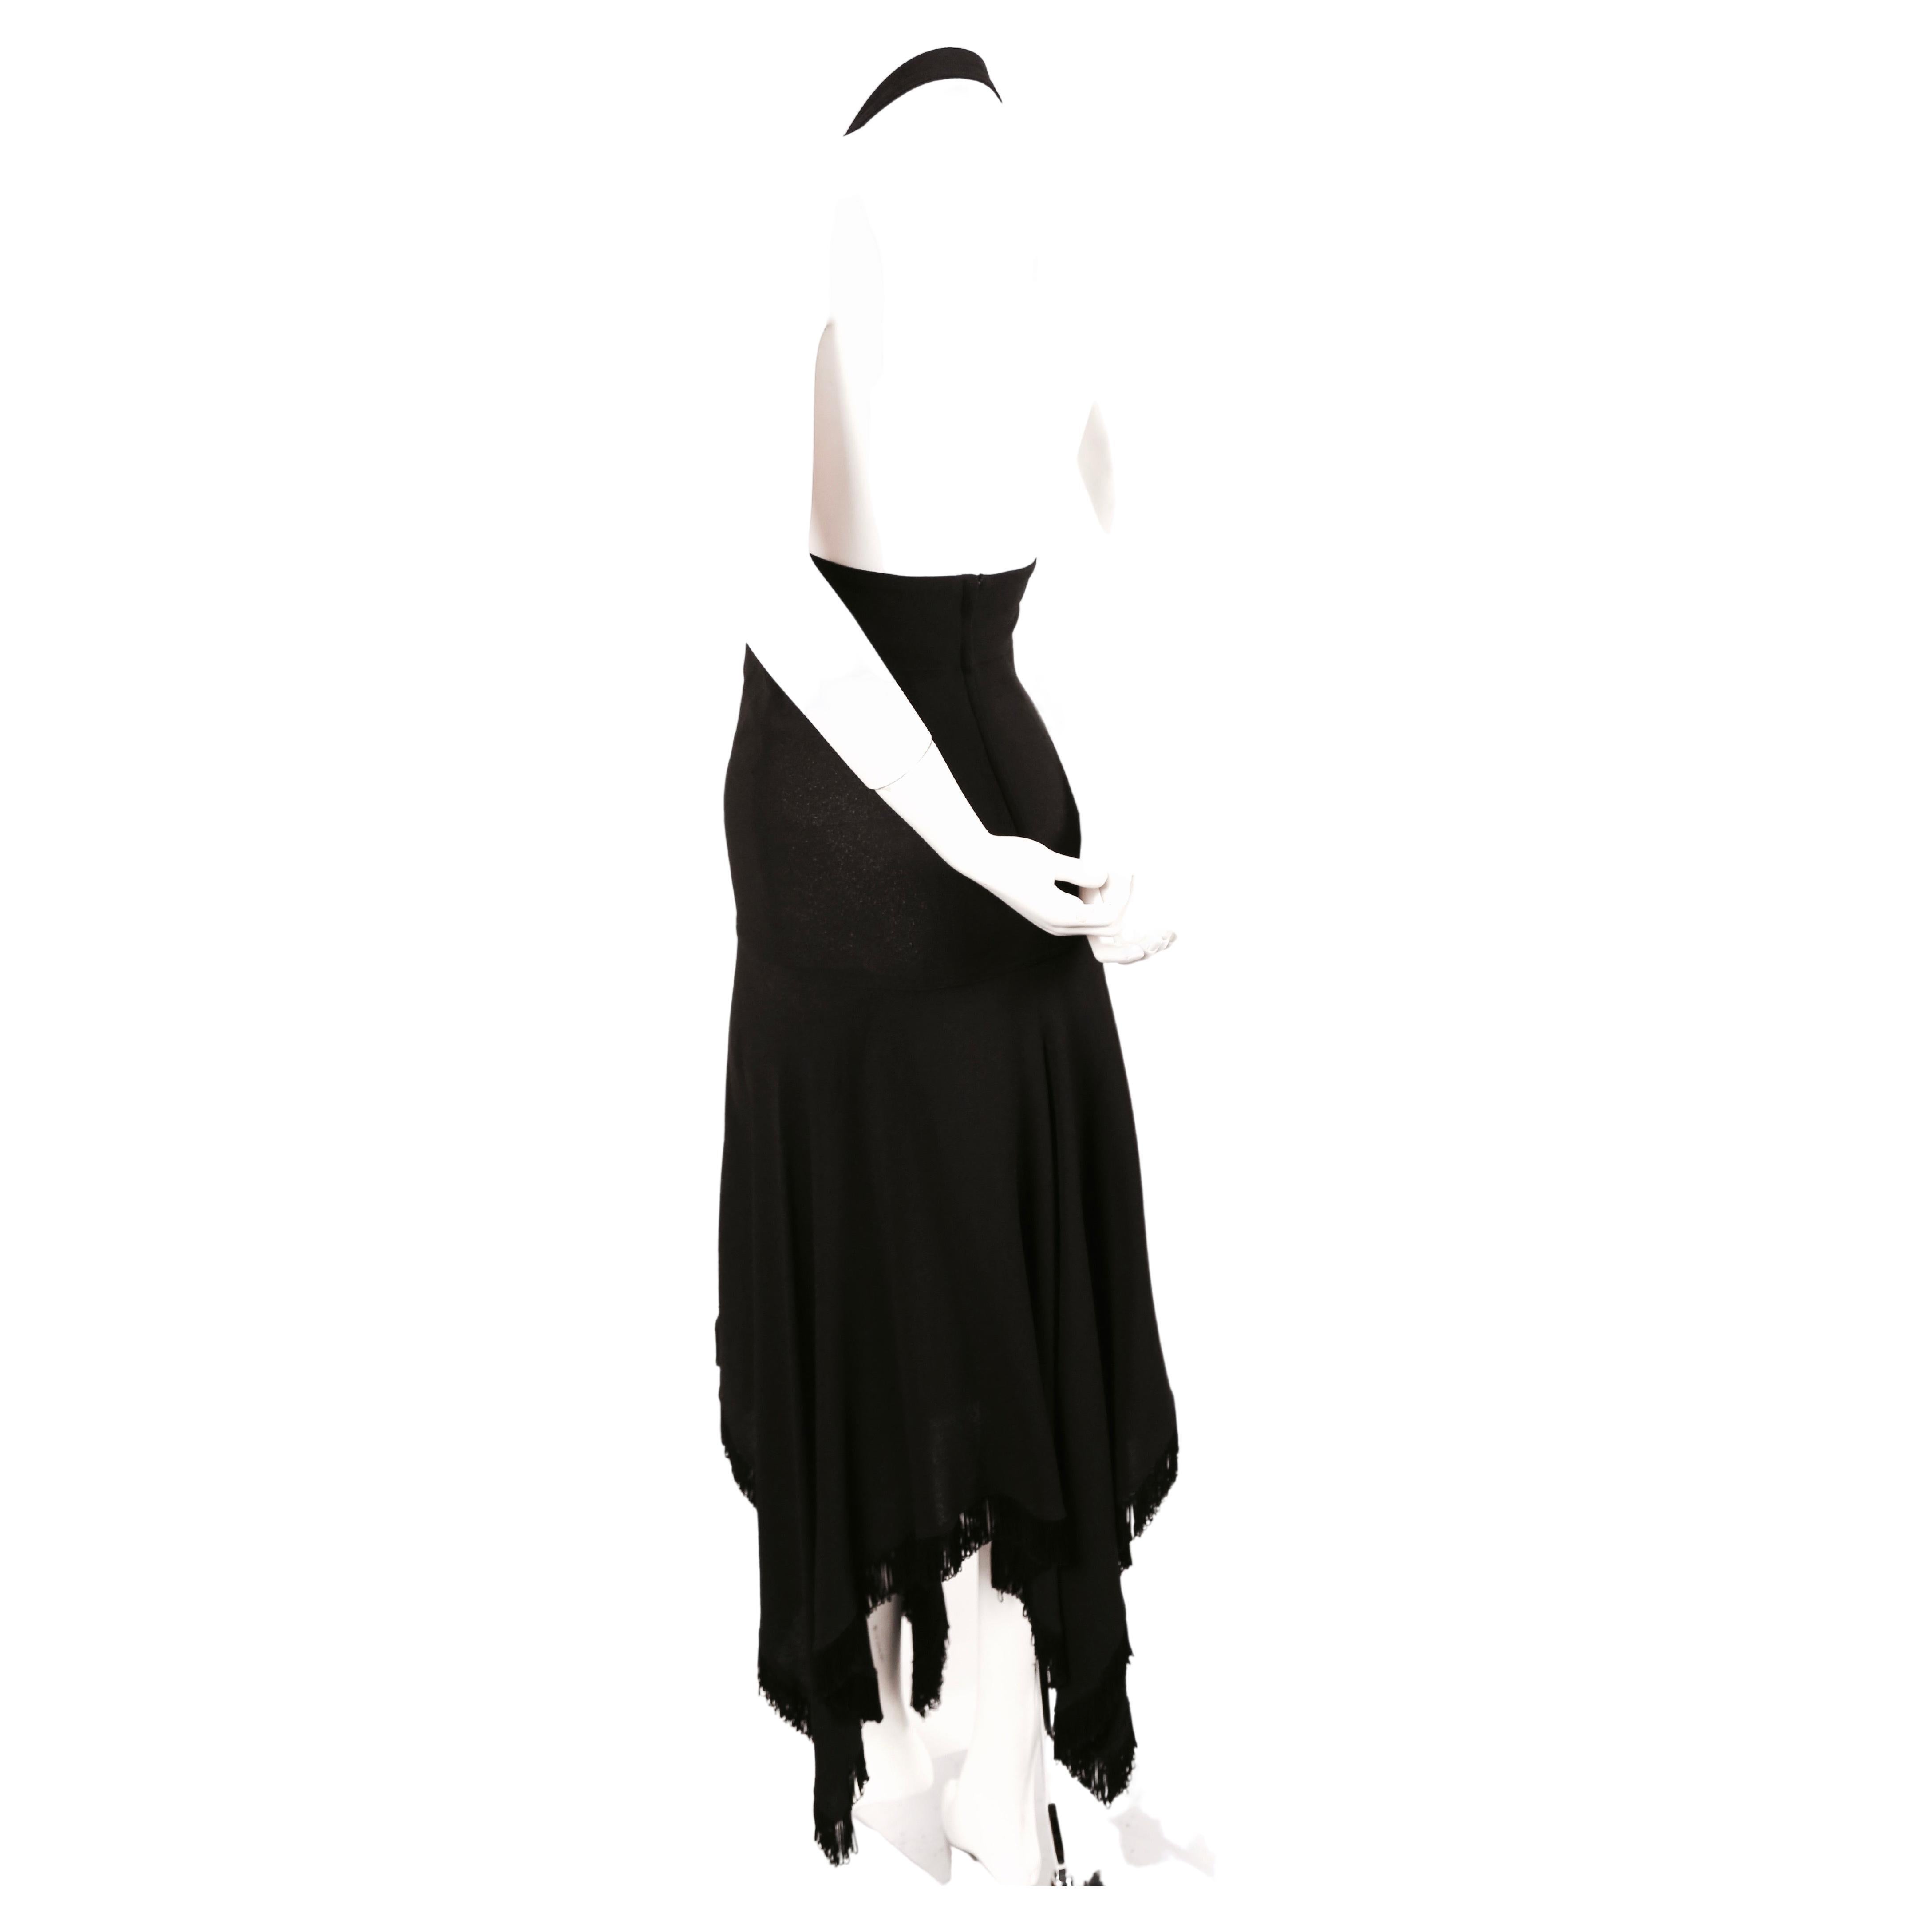 Very rare black moss crepe halter gown with handkerchief hemline and fringed trim from Alice Pollock from her Quorum boutique dating to late 1960's. Alice established her Quorum boutique in 1964 and began her collaboration with Ossie Clark and Celia